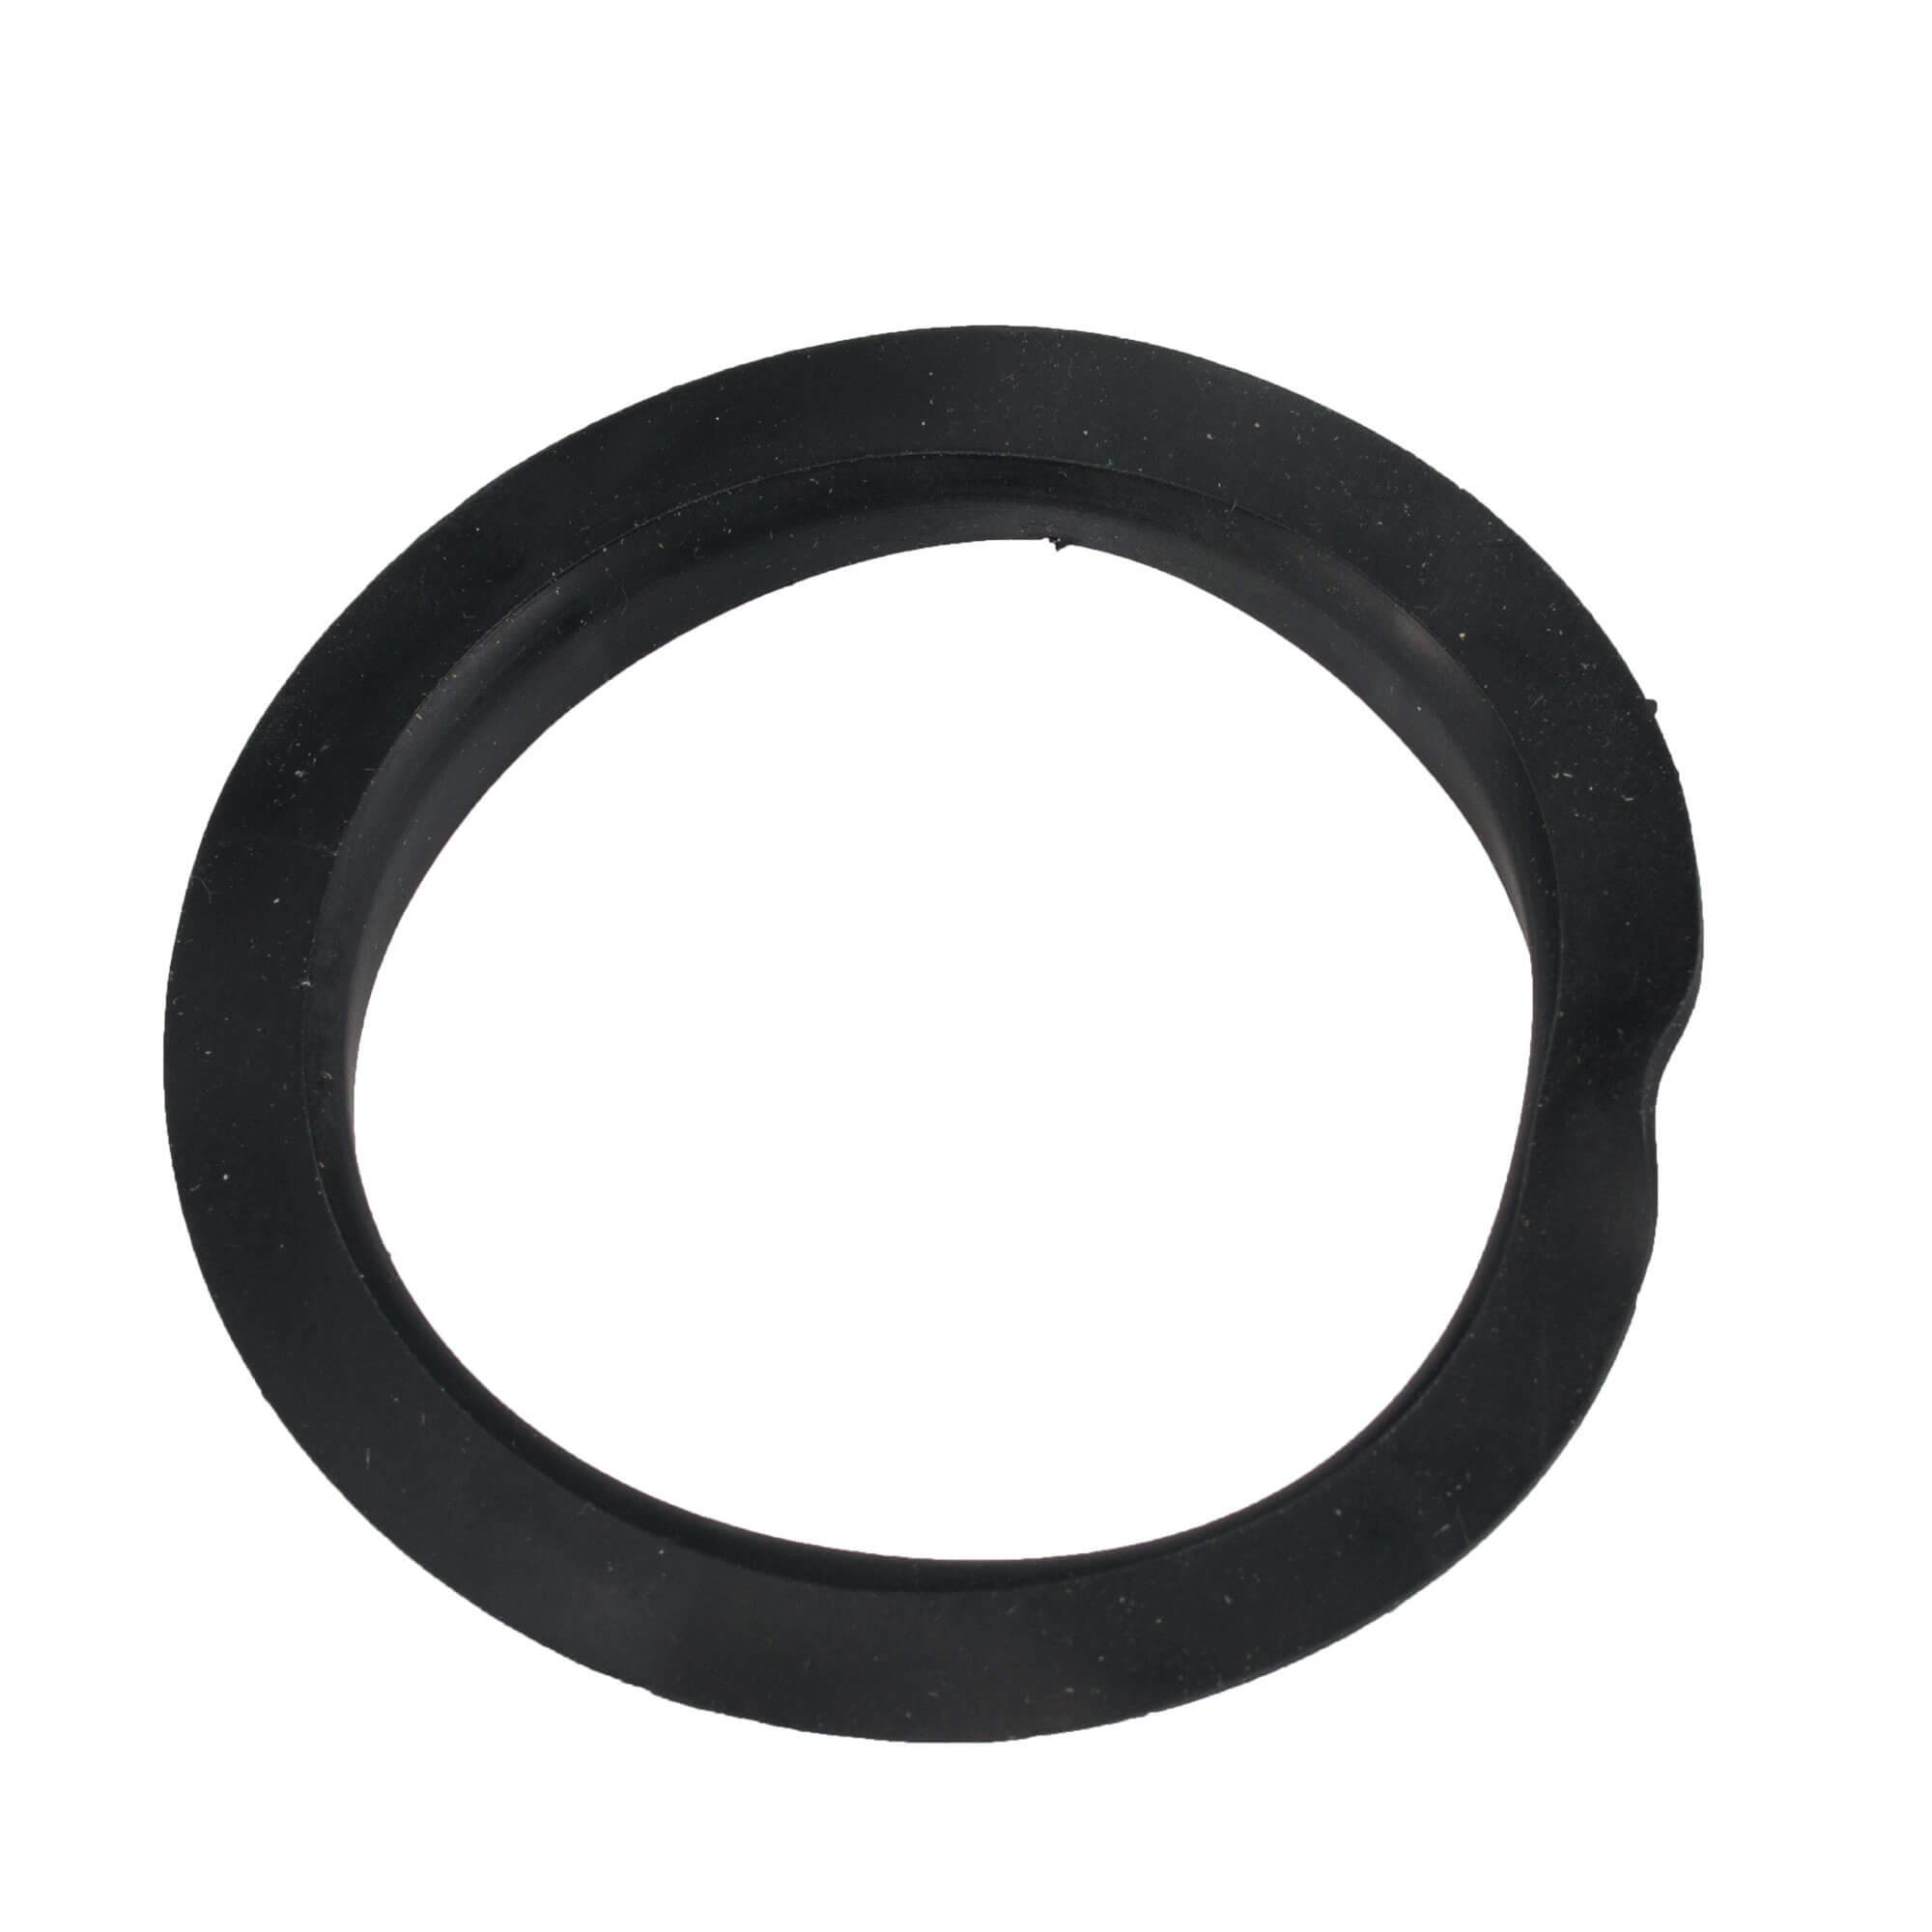 Gasket - spare part for Cancan manual juicer